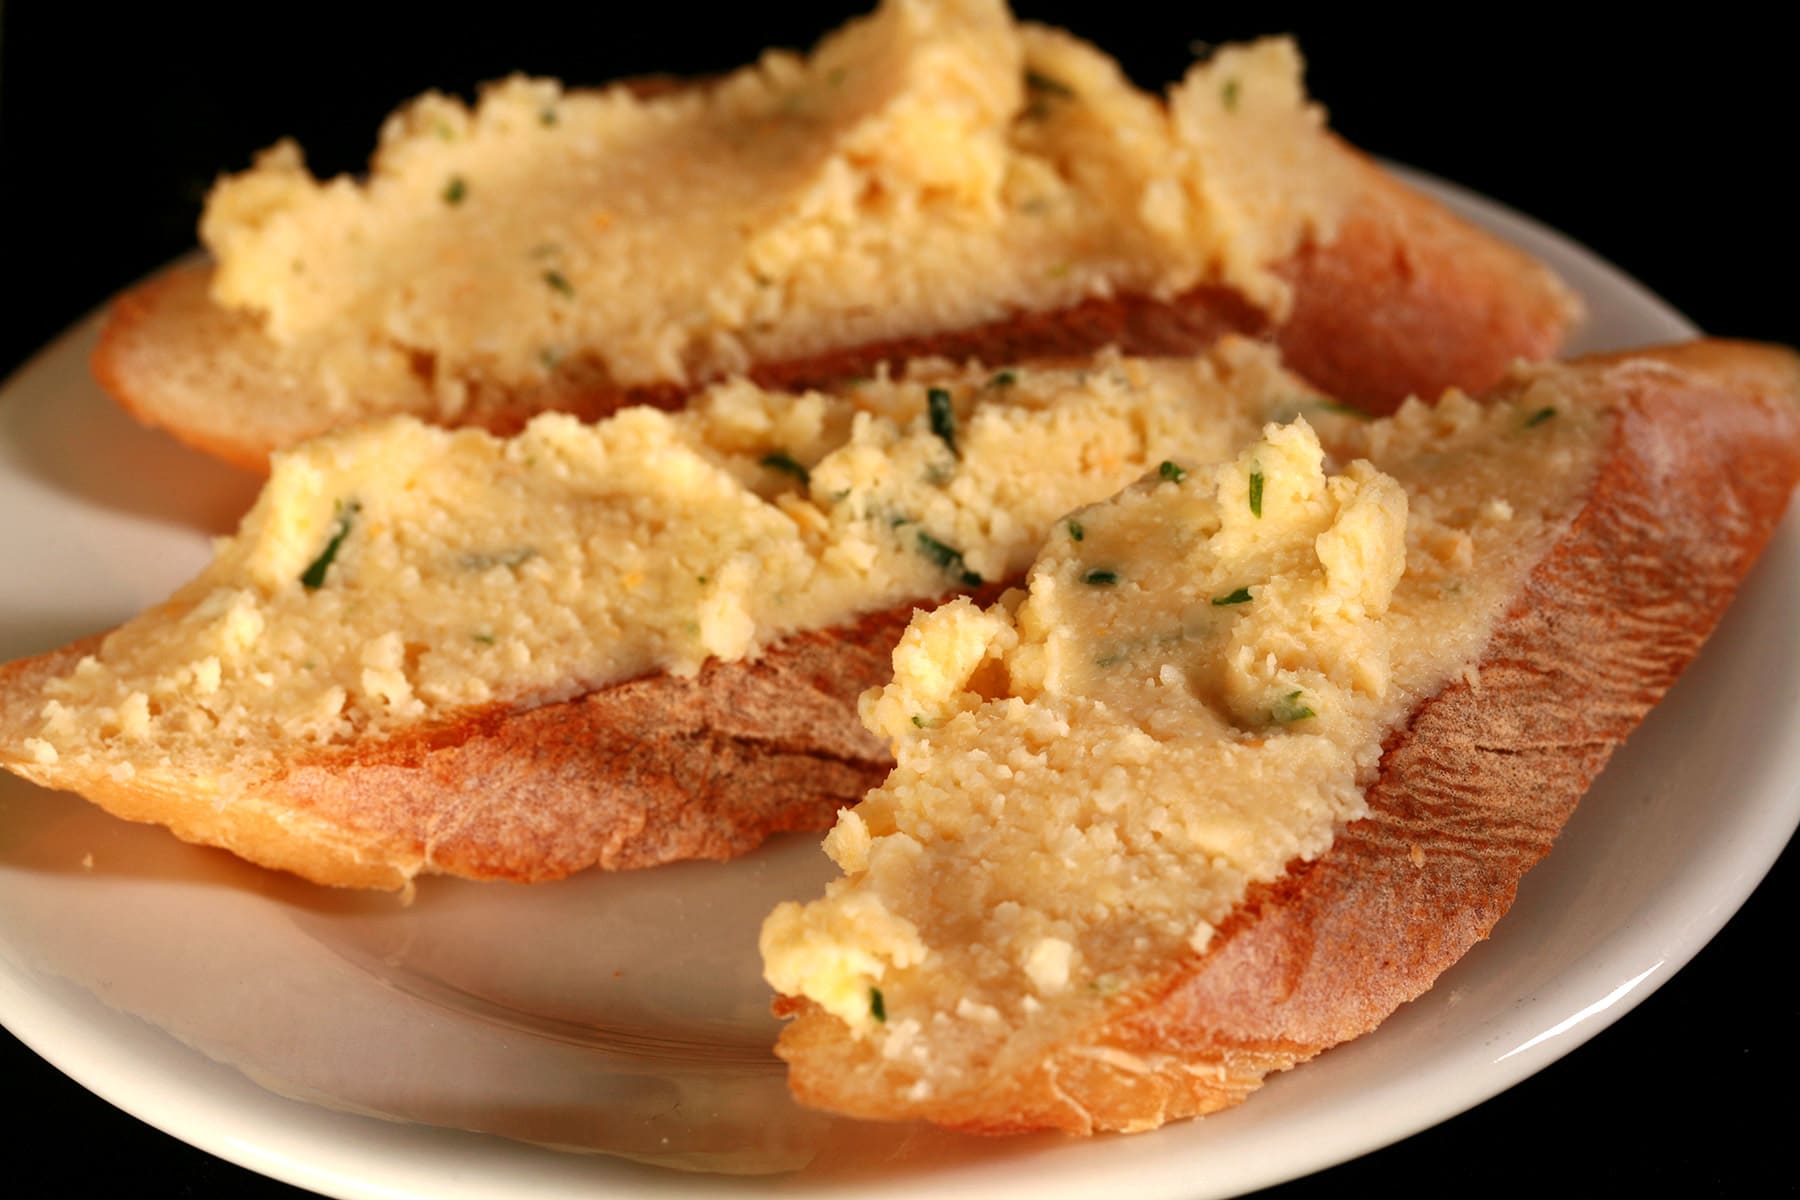 Cold fromage fort spread on thin slices of baguette.